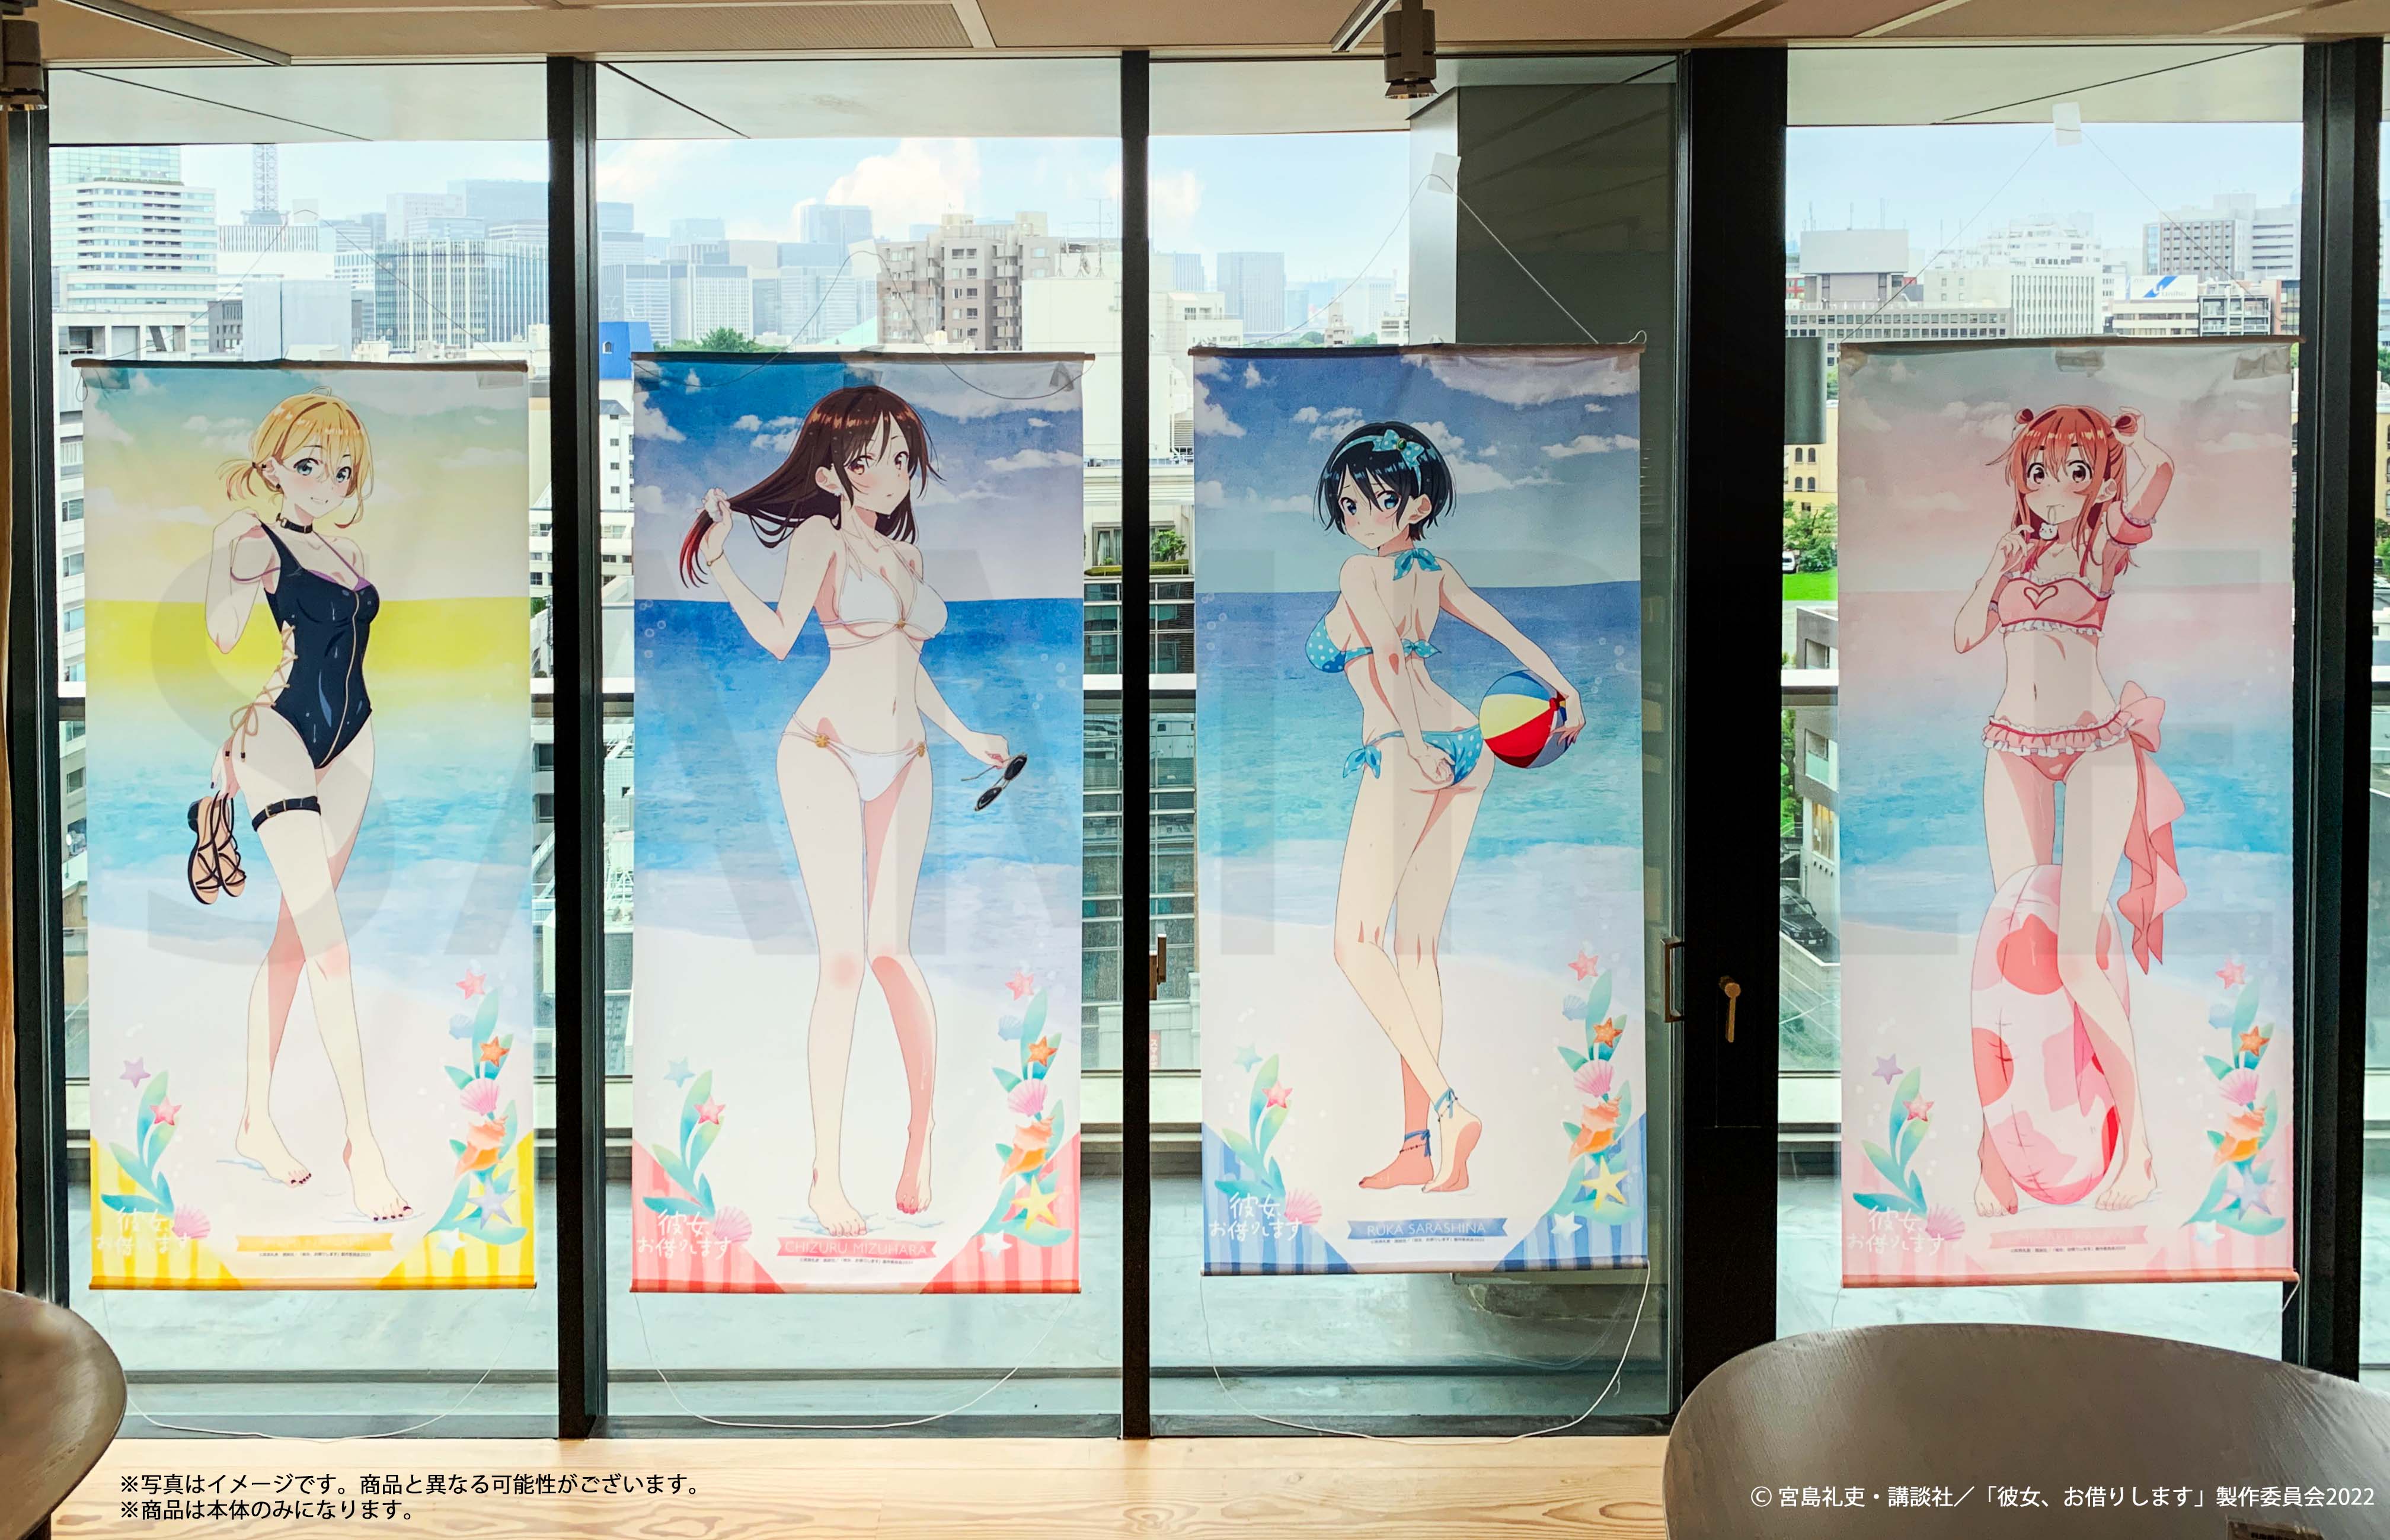 Rent-A-Girlfriend - Chizuru Mizuhara Swimsuit Life-Sized Tapestry image count 2